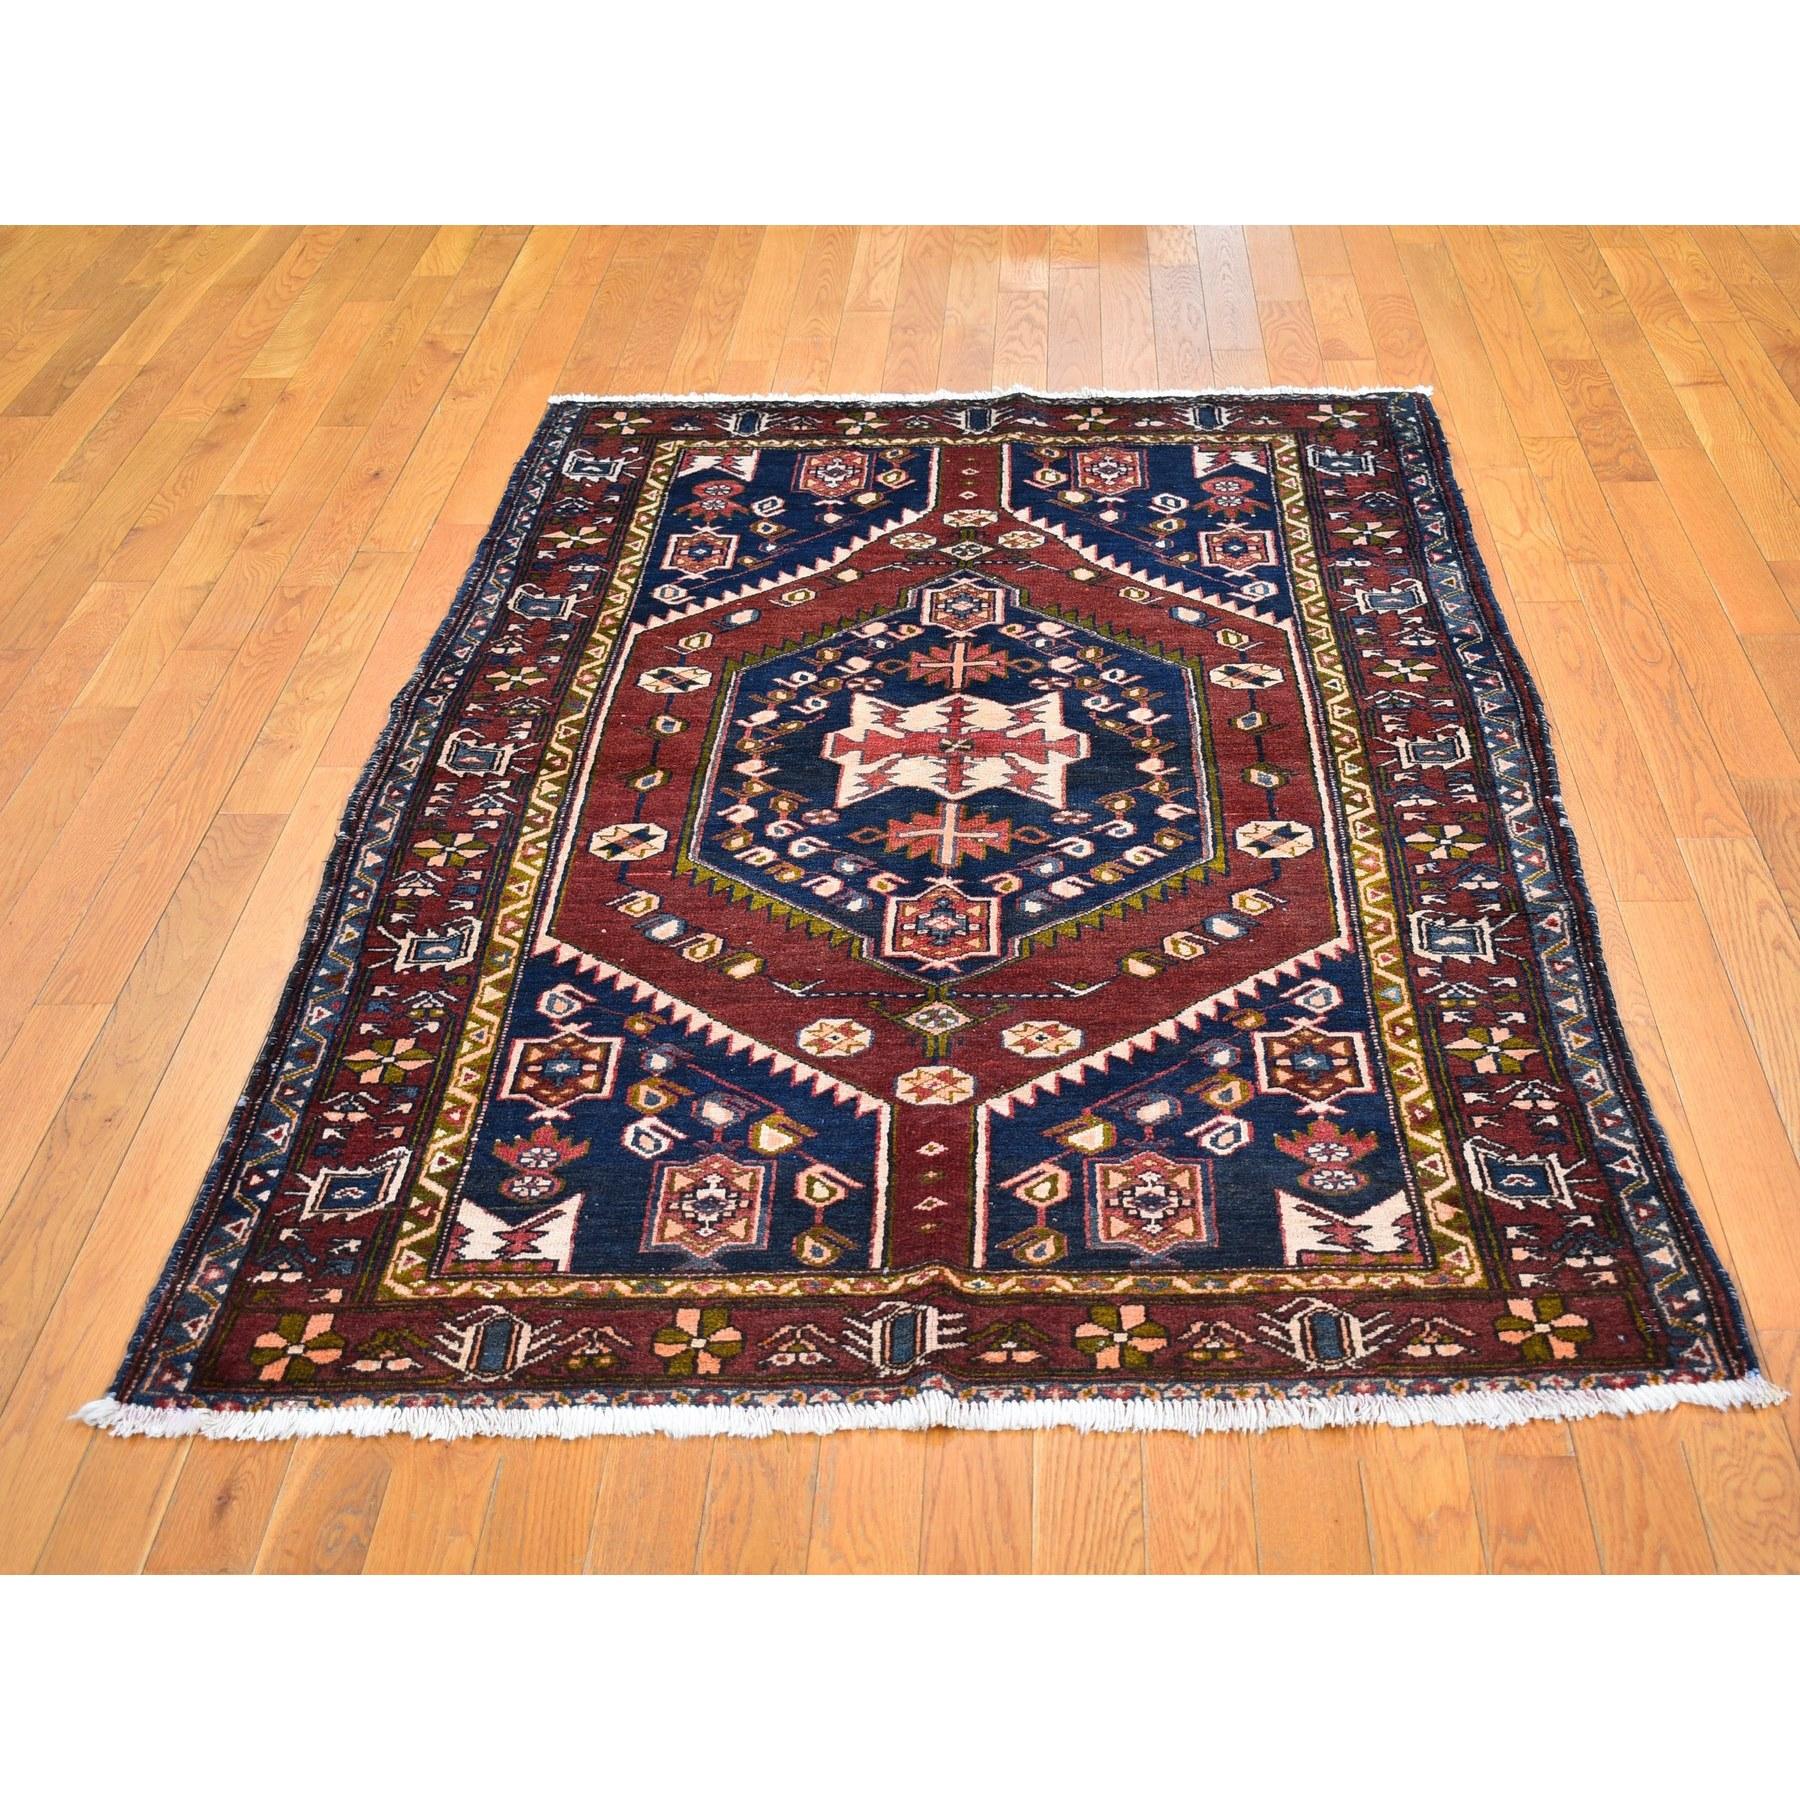 This fabulous hand-knotted carpet has been created and designed for extra strength and durability. This rug has been handcrafted for weeks in the traditional method that is used to make
Exact rug size in feet and inches : 4'4